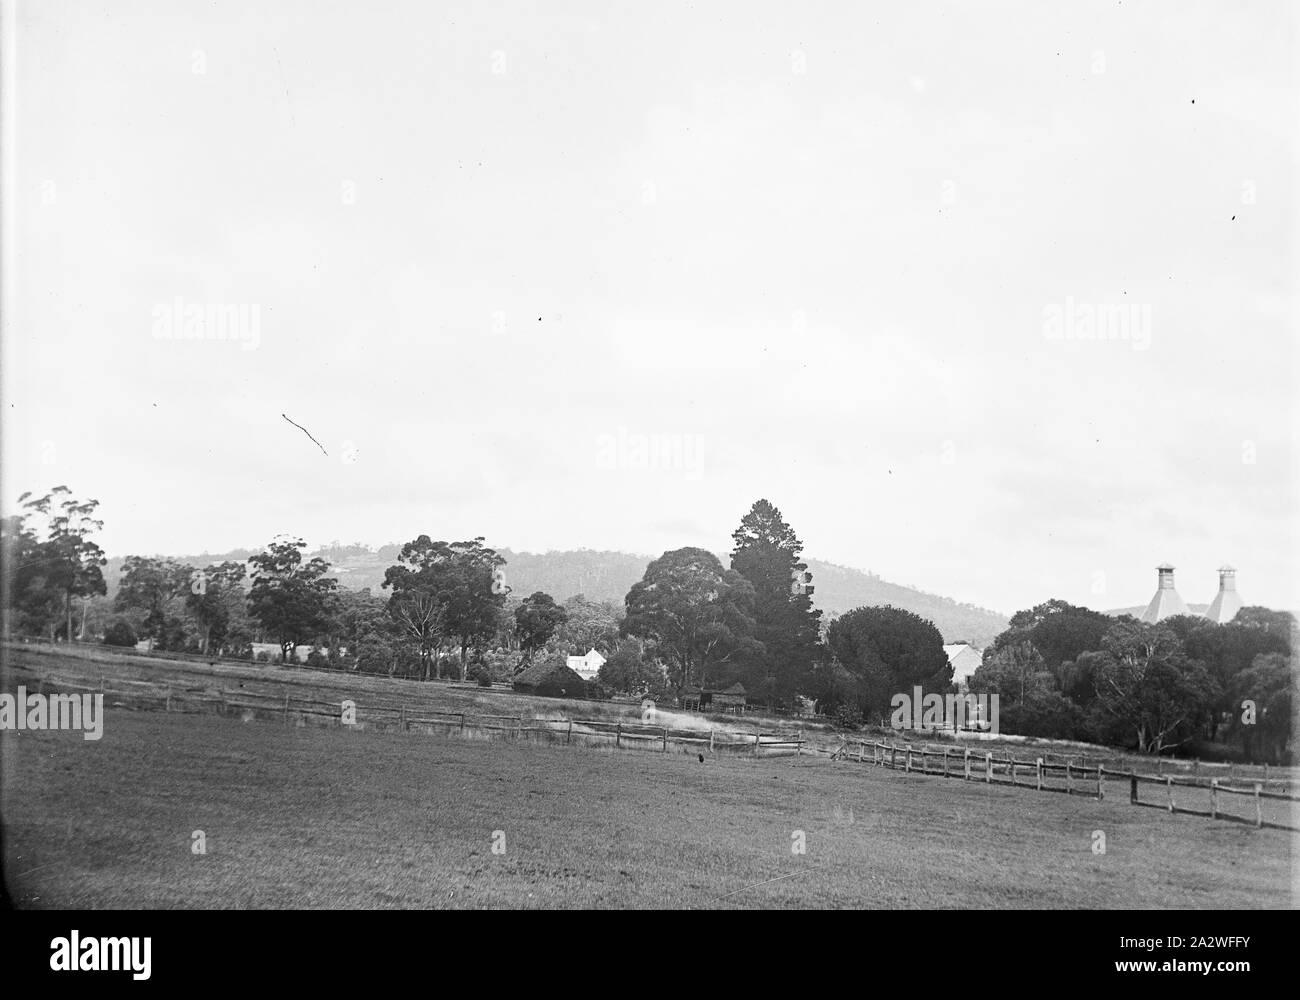 Glass Negative - Farm House & Paddocks, circa 1900s, Black and white 1/4 plate glass negative featuring paddocks and a farm house with two chimneys visible behind a plantation of European trees. Likely taken circa 1900s. This is one of twelve negatives originally housed in an Imperial Special Rapid Plates box featuring scenes in Sydney and a picnic at an unknown location, presumably in New South Wales or Victoria. The provenance of these images is Stock Photo